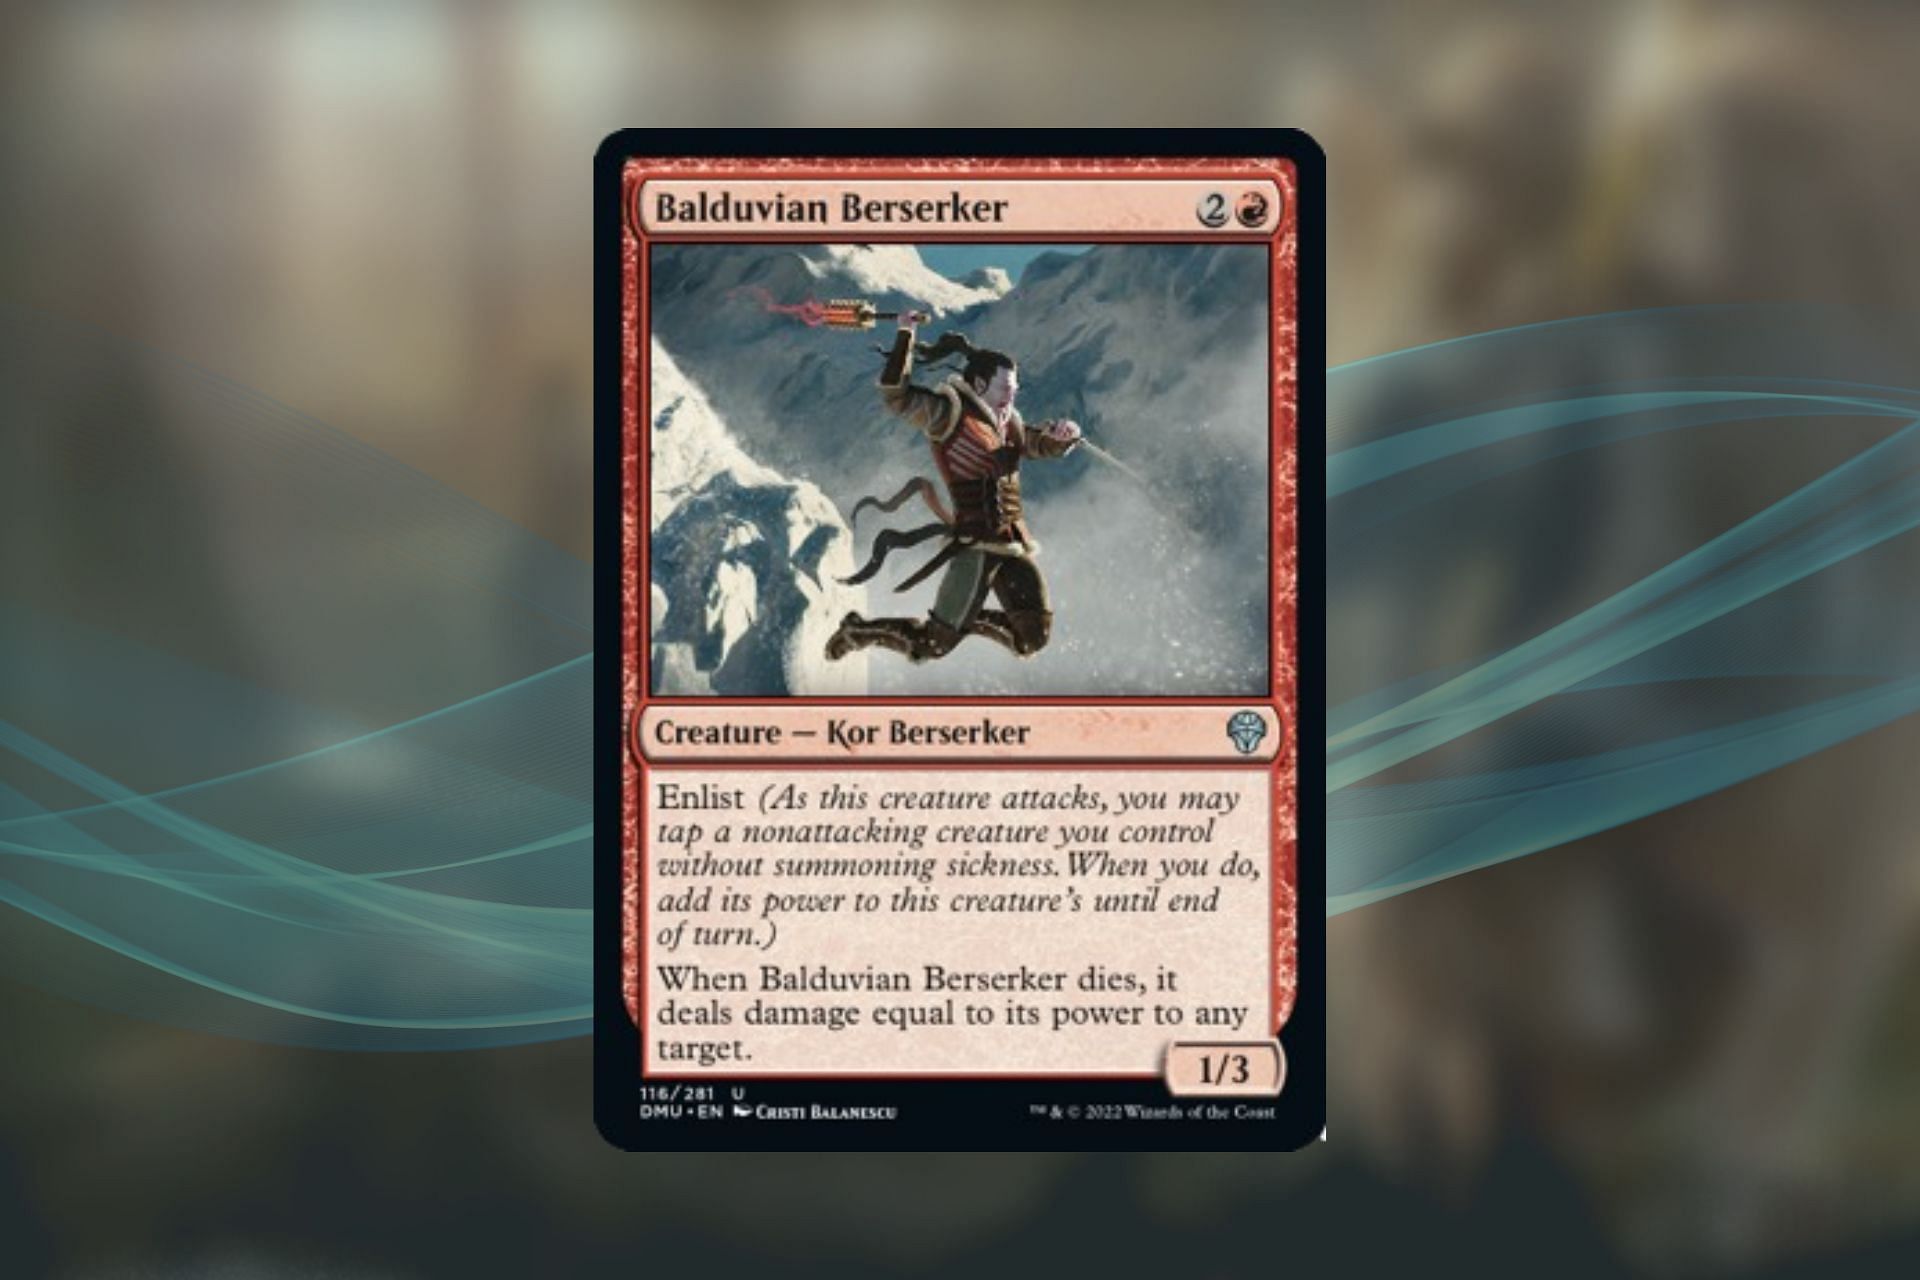 The stronger Balduvian Berserker is, the more harm it does (Image via Wizards of the Coast)